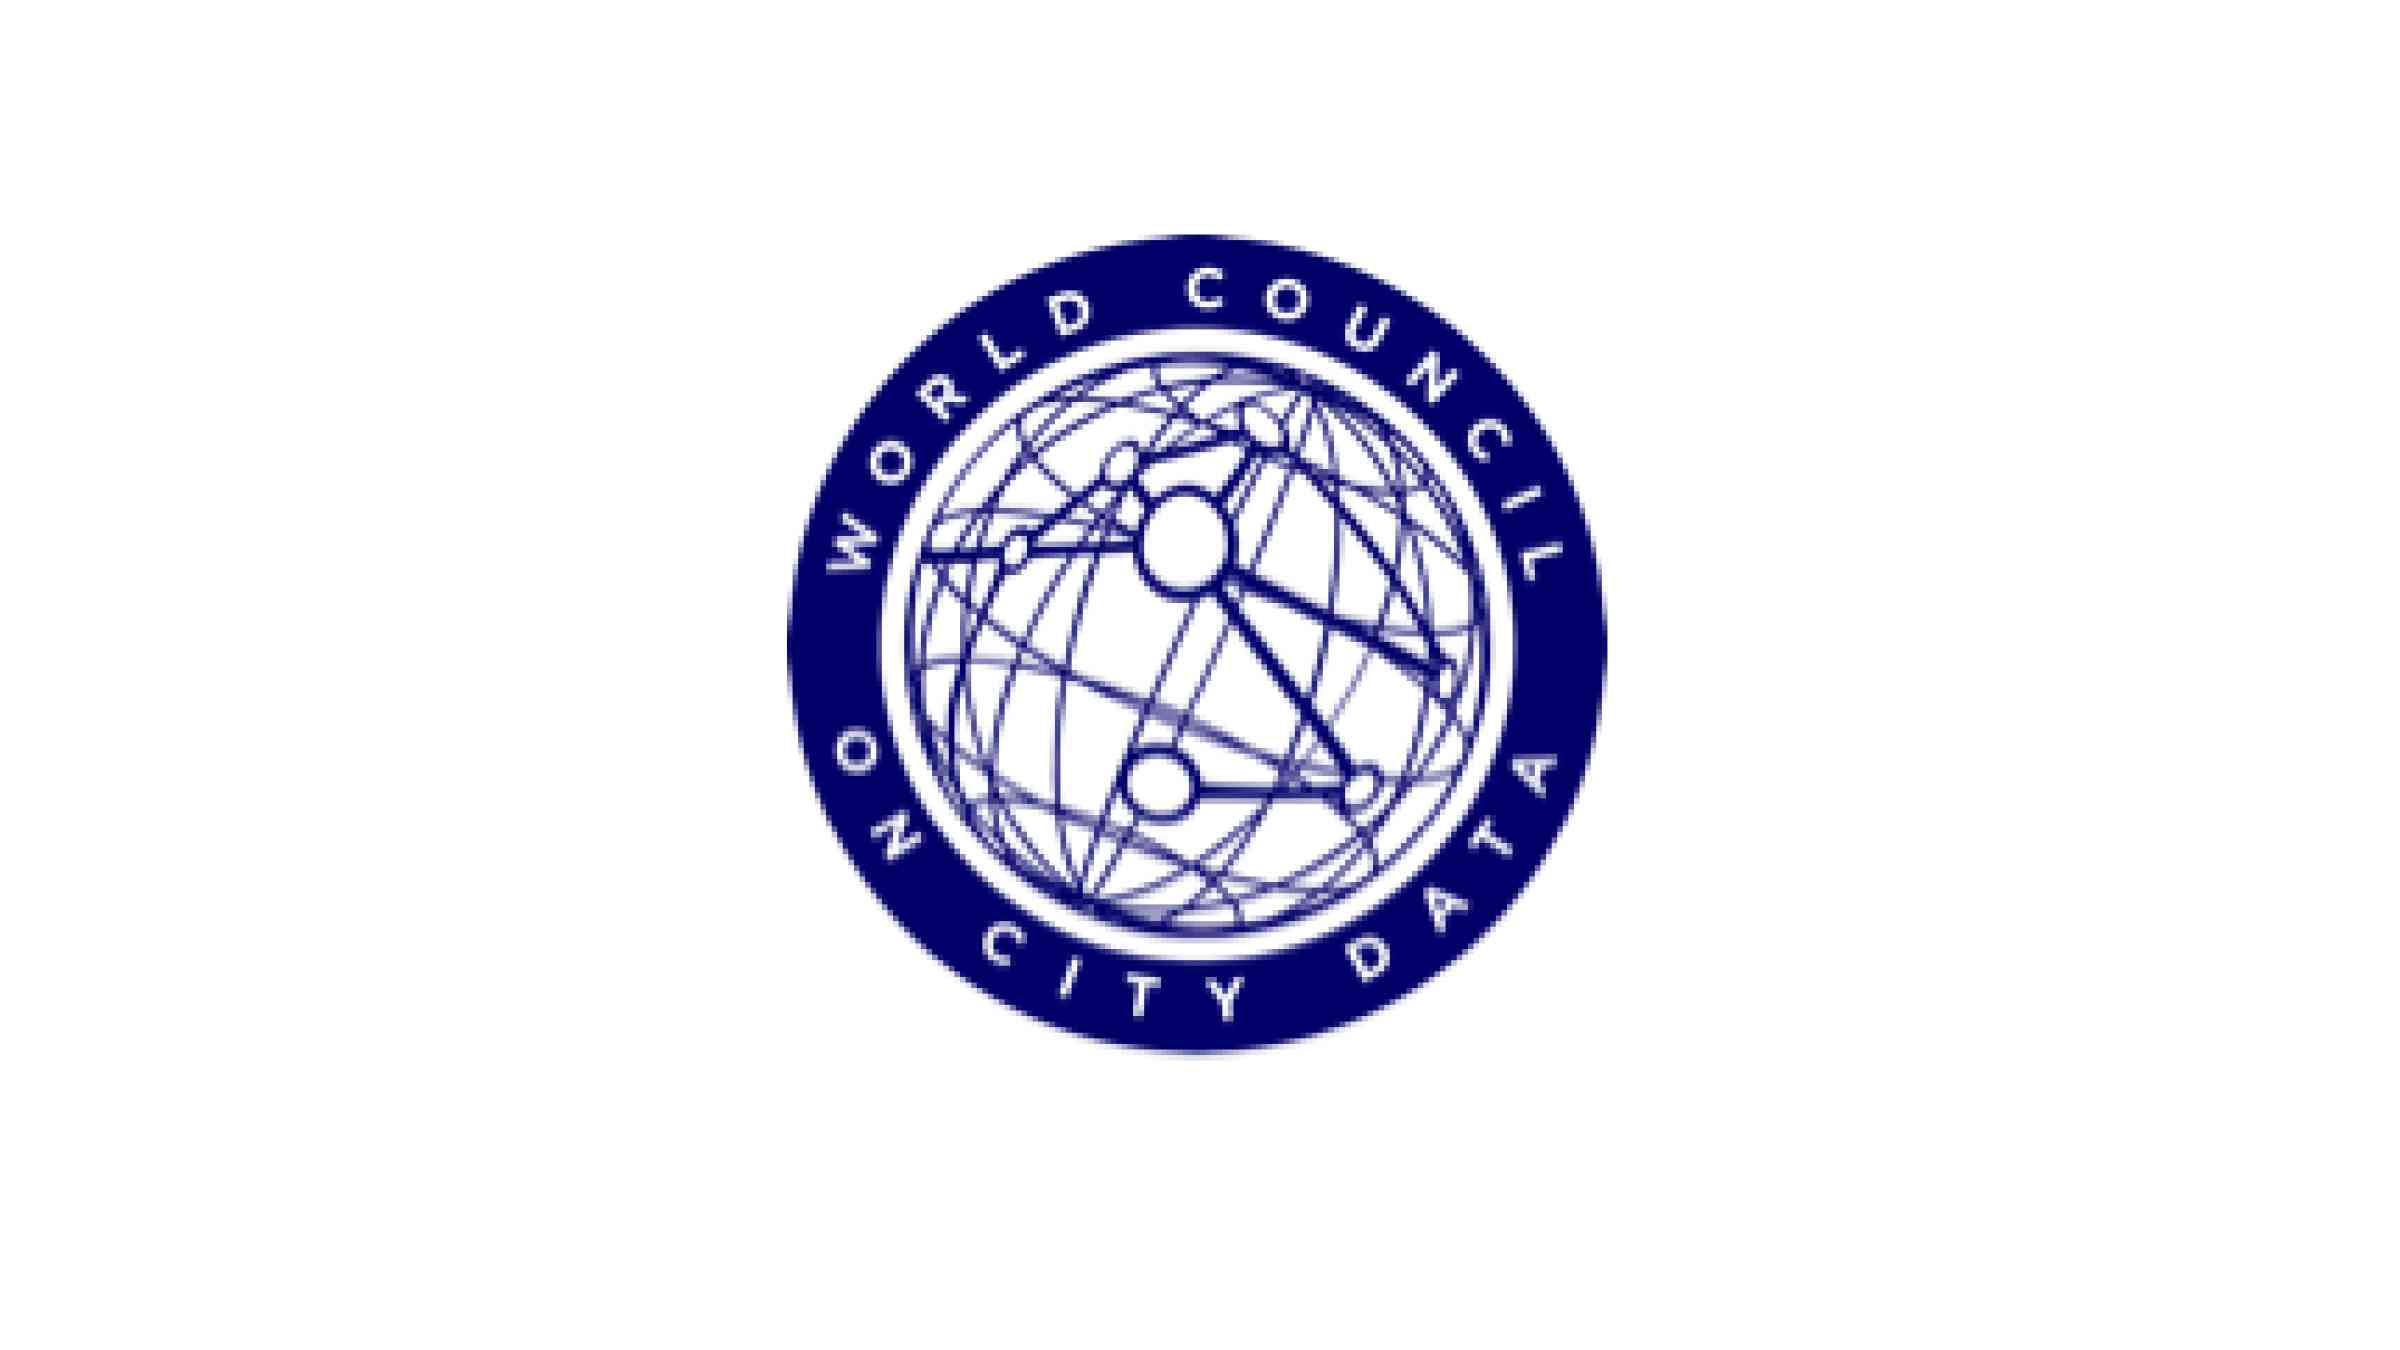 World Council on City Data (WCCD)